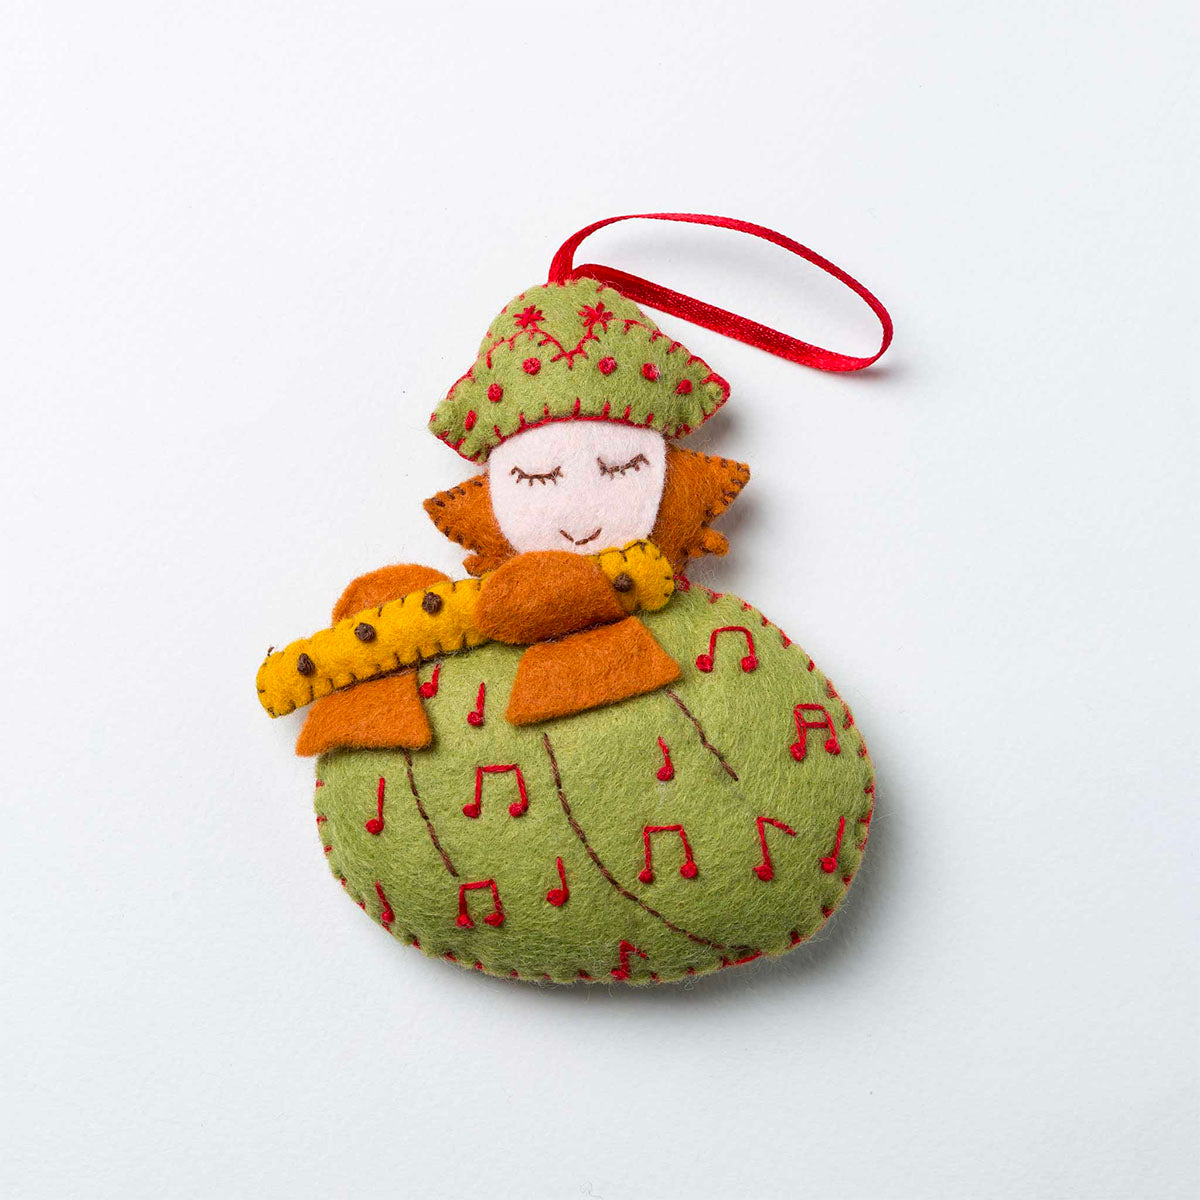 12 Days of Christmas Felt Ornament Kit - Piper Piping